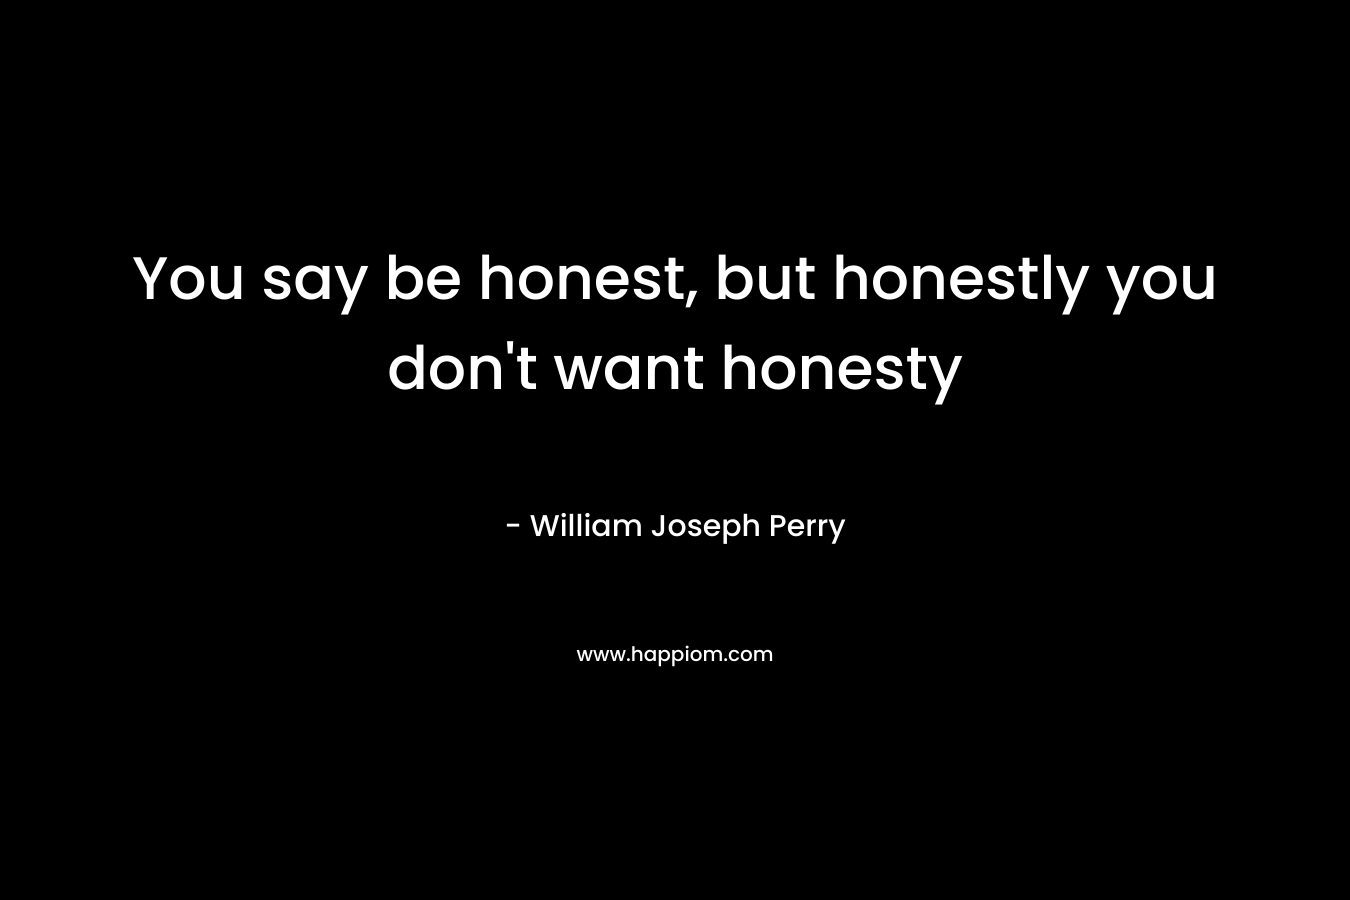 You say be honest, but honestly you don’t want honesty – William Joseph Perry